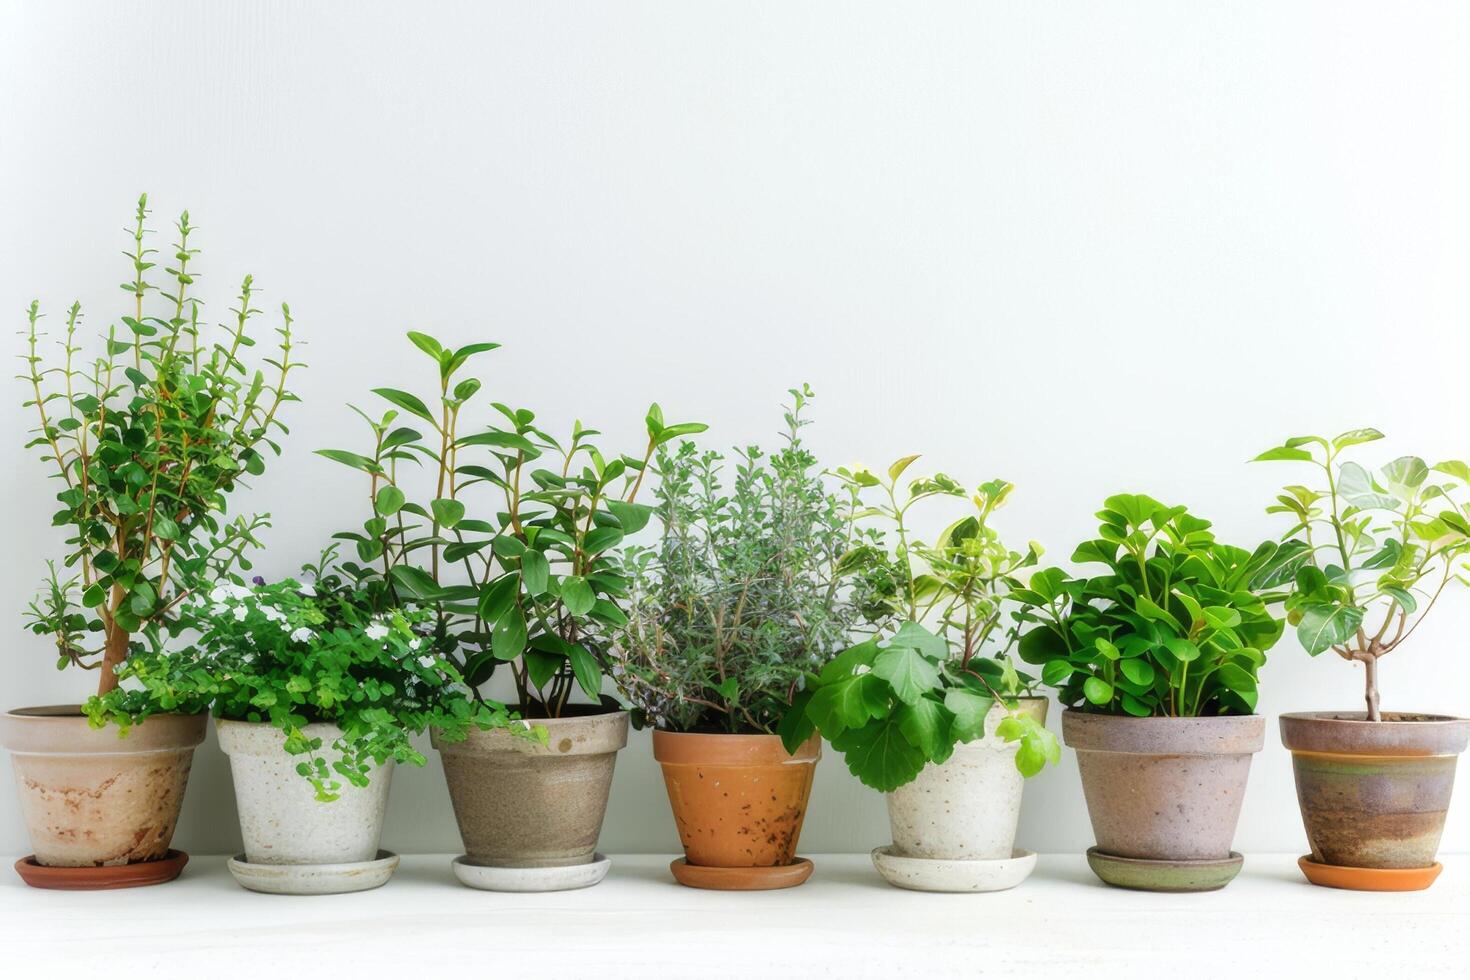 Green plants blooming in pots white background photo